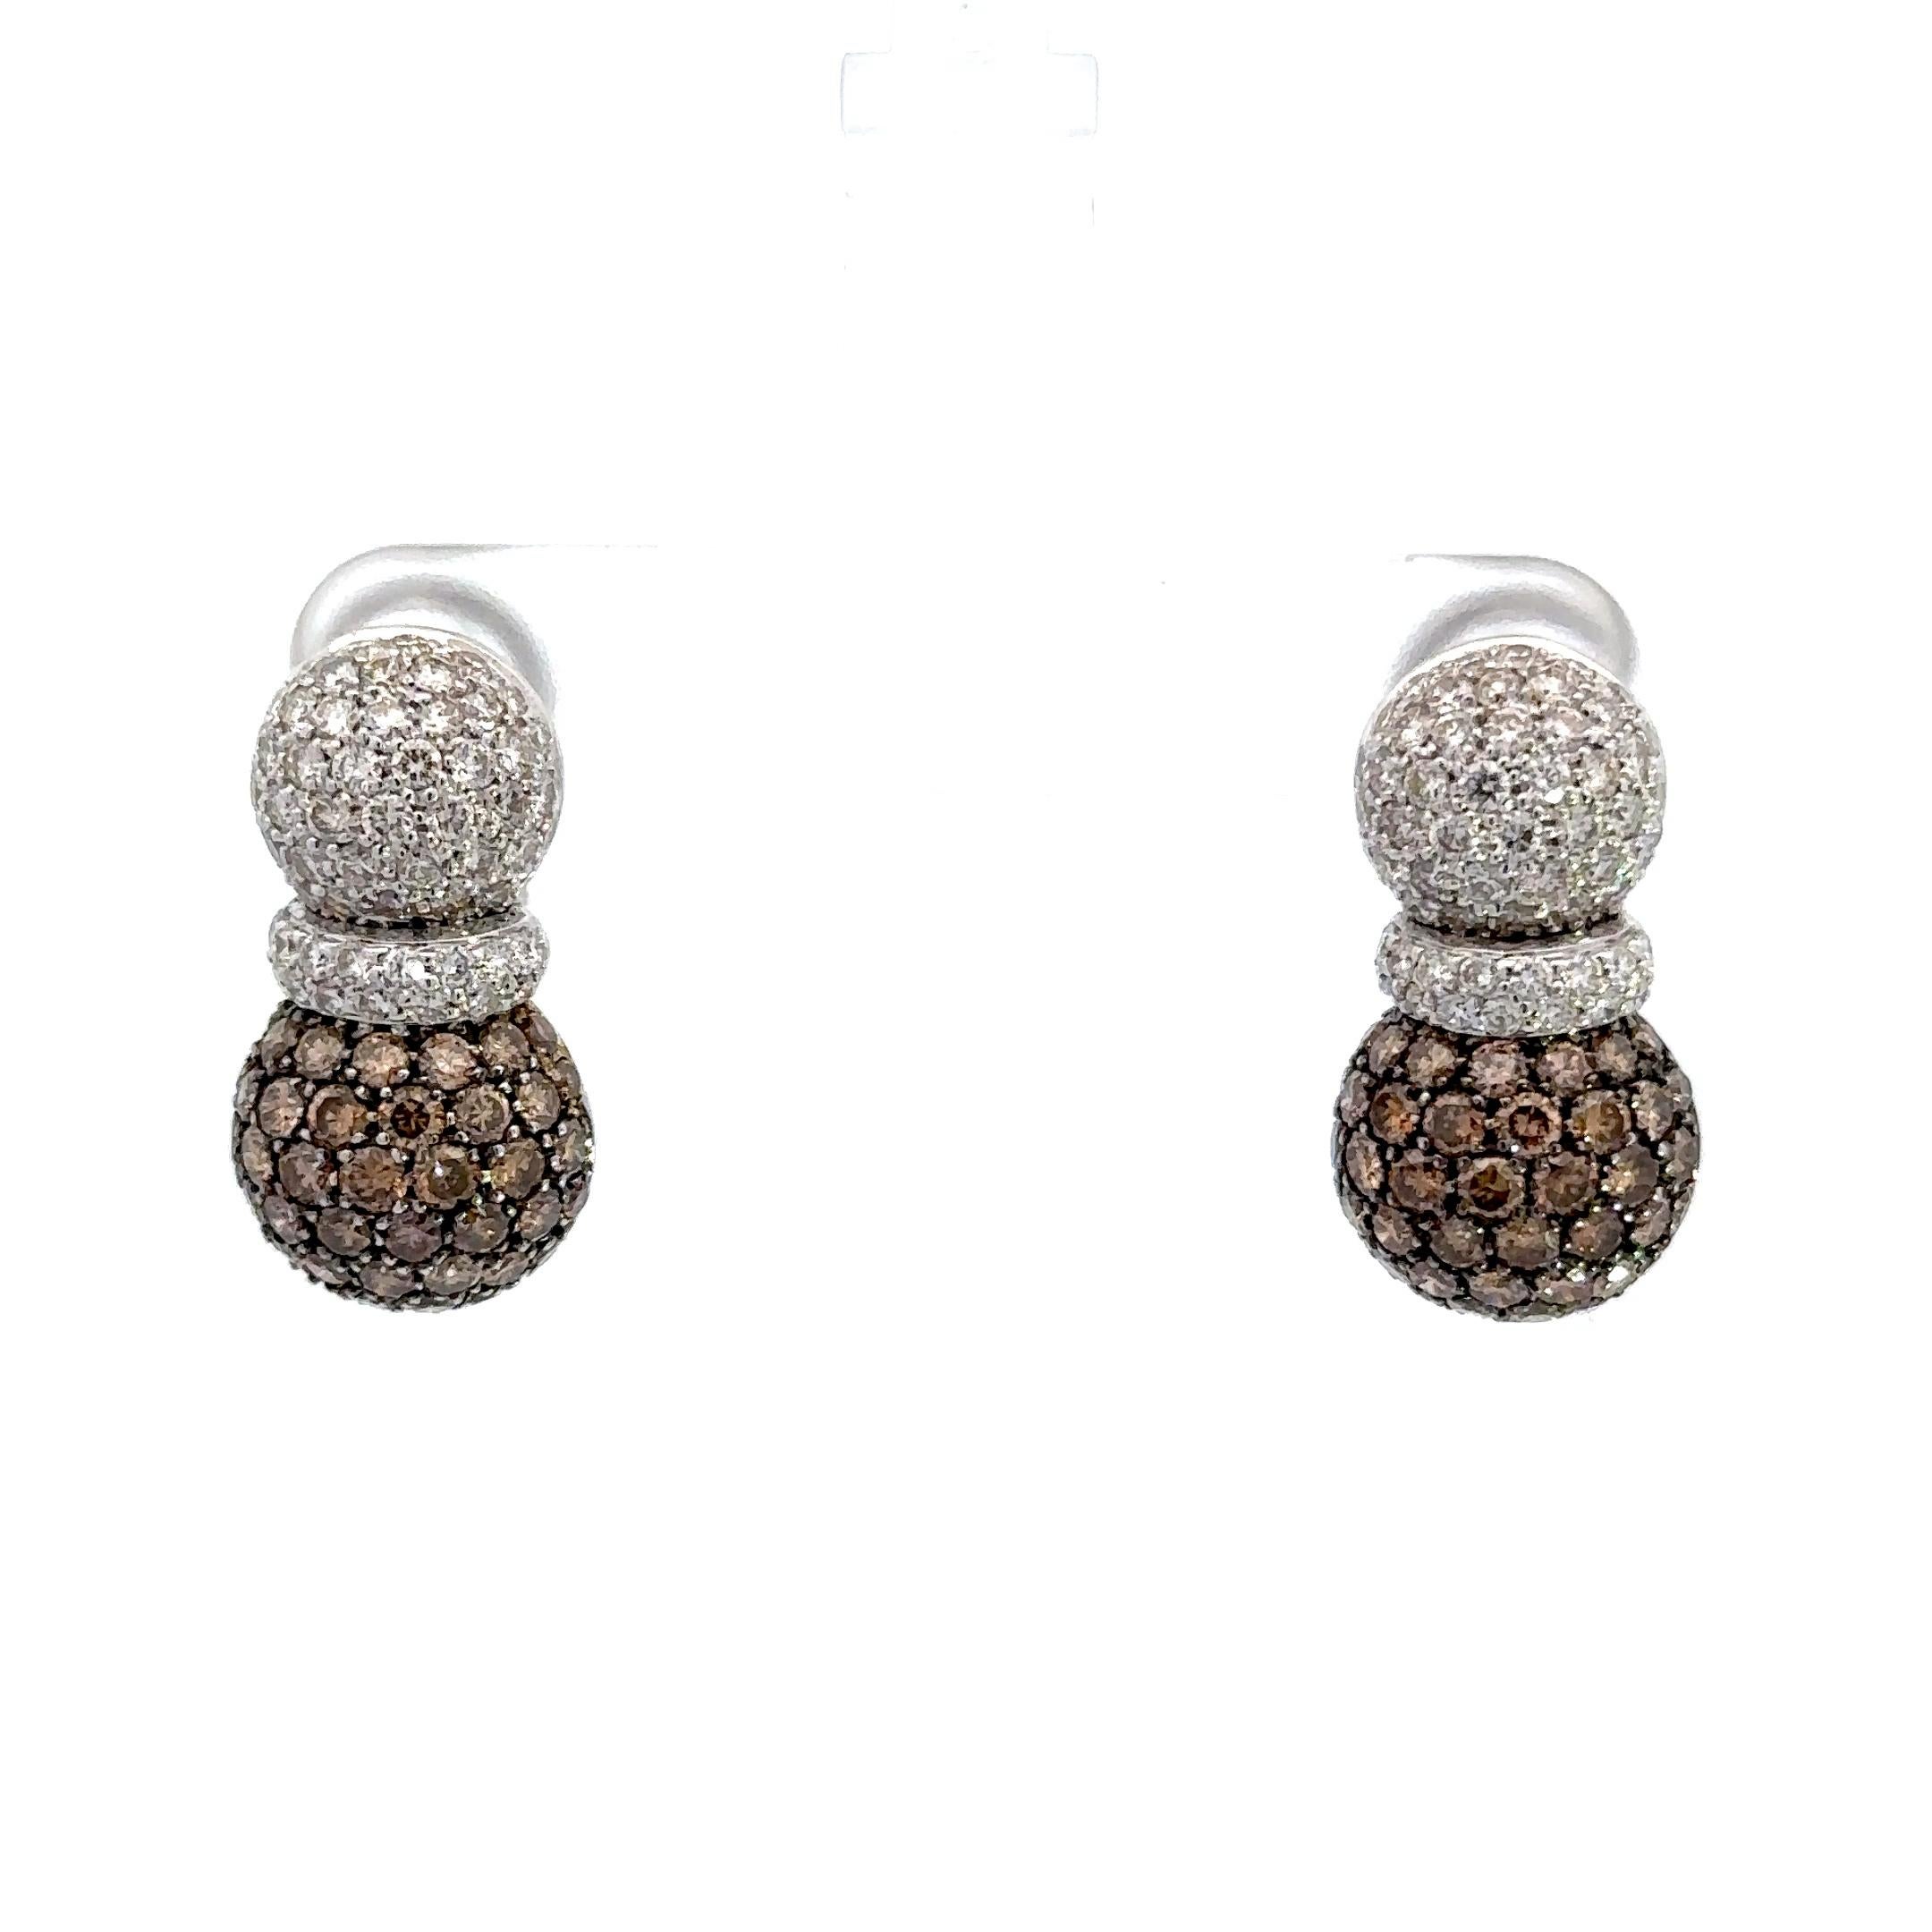 4.36ct of Natural Brown & White Diamond, Pineapple Earrings in 18kt White Gold  For Sale 1